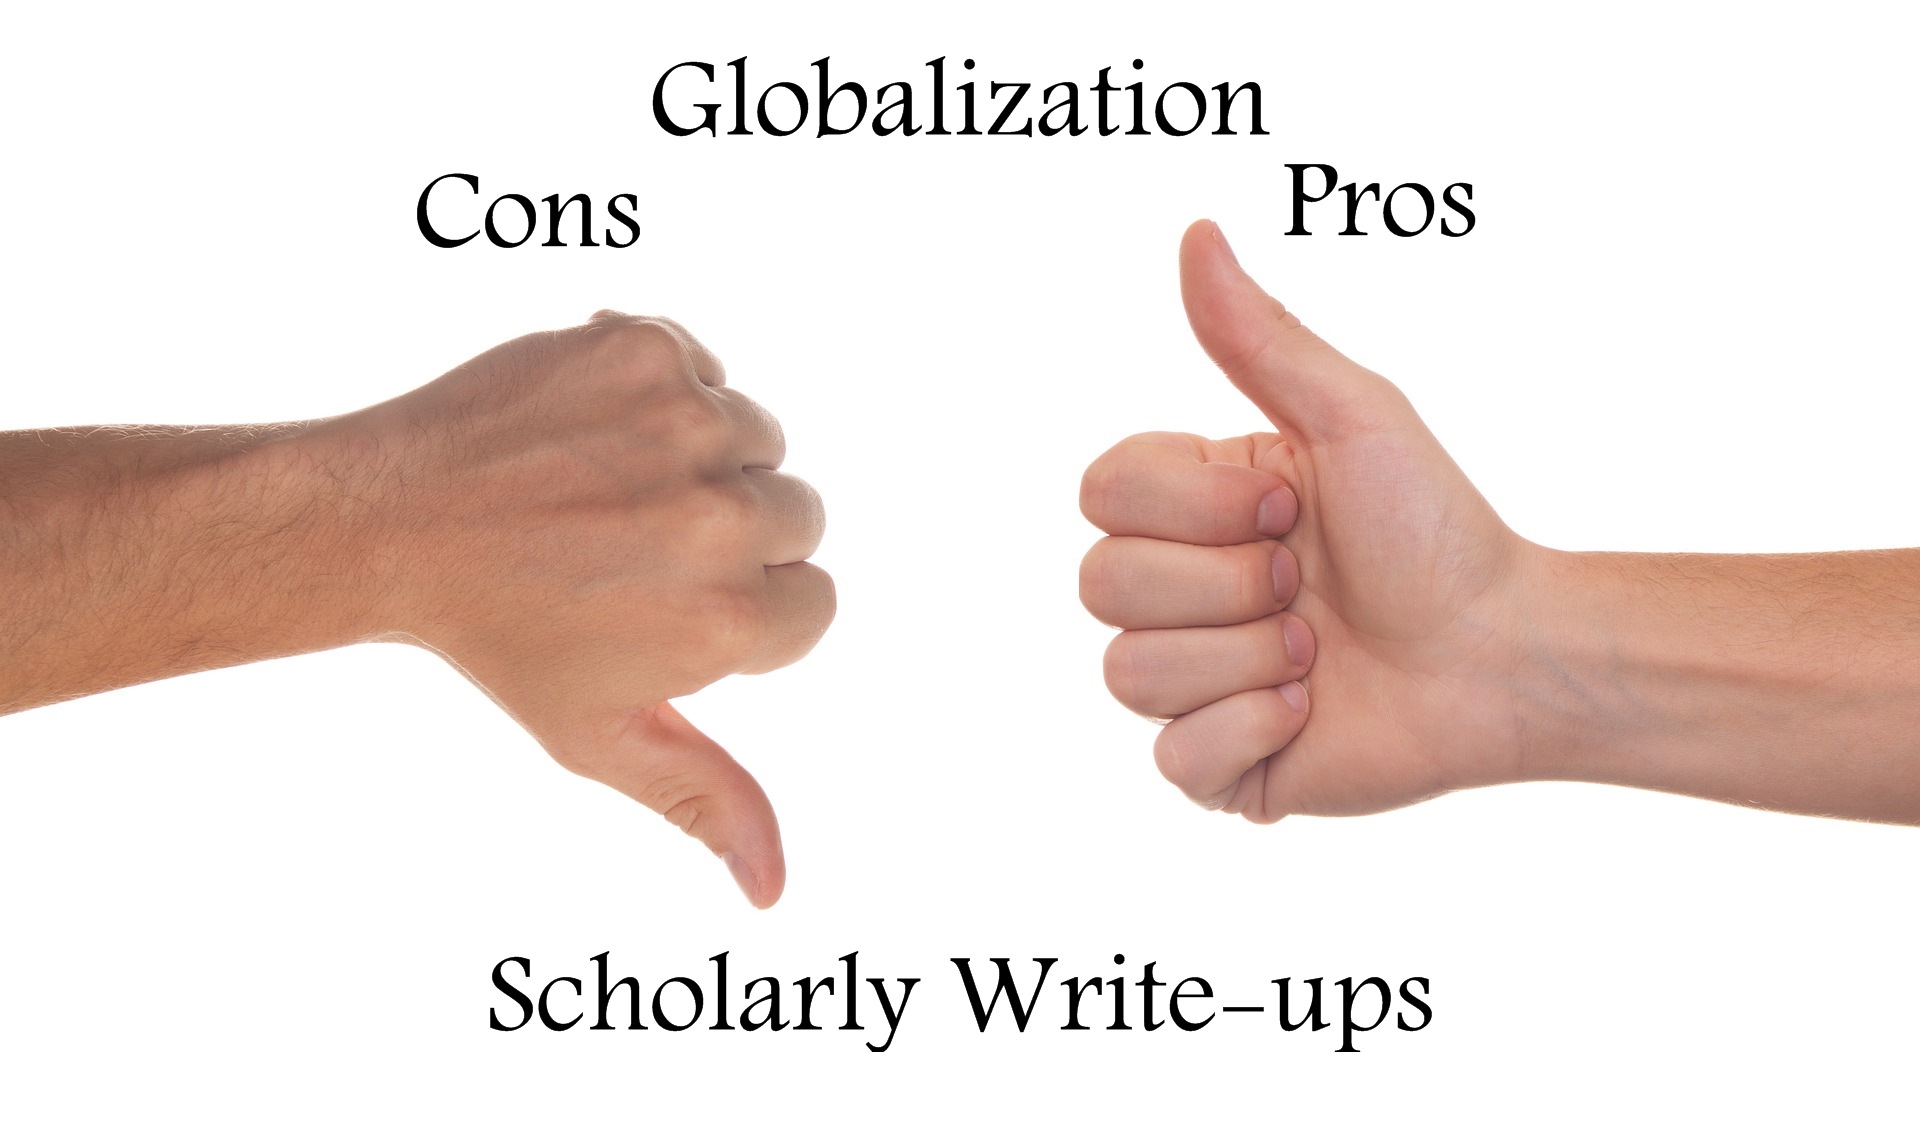 globalization pros and cons css essay pdf